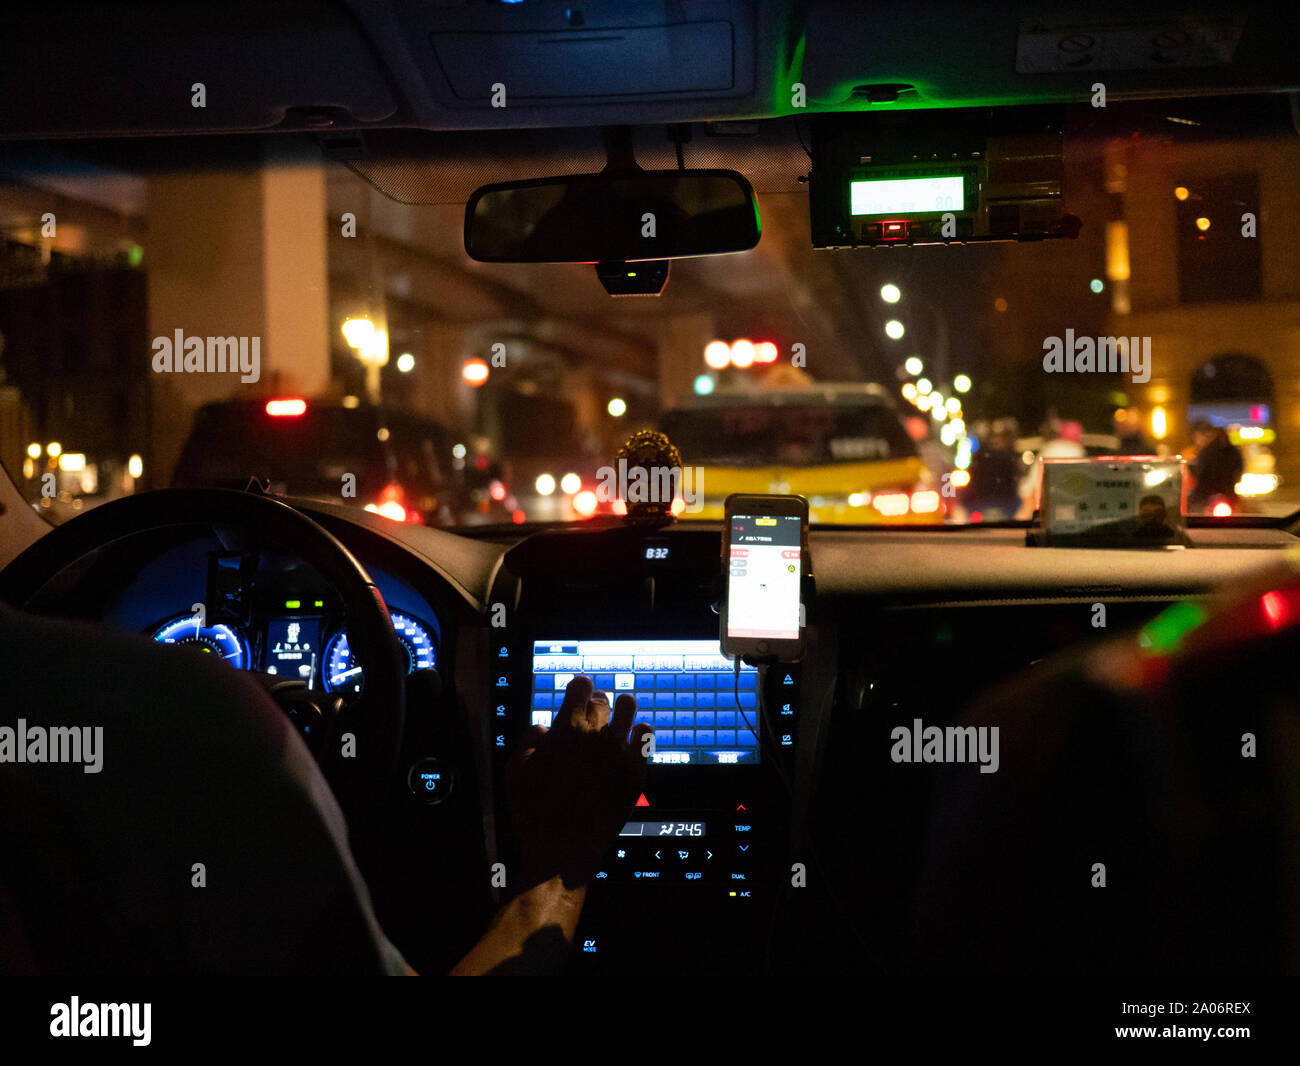 Taipei, Taiwan: Inside view of a taiwanese Taxi at night in the city. Driver using Touchdisplay device / Navigation Stock Photo